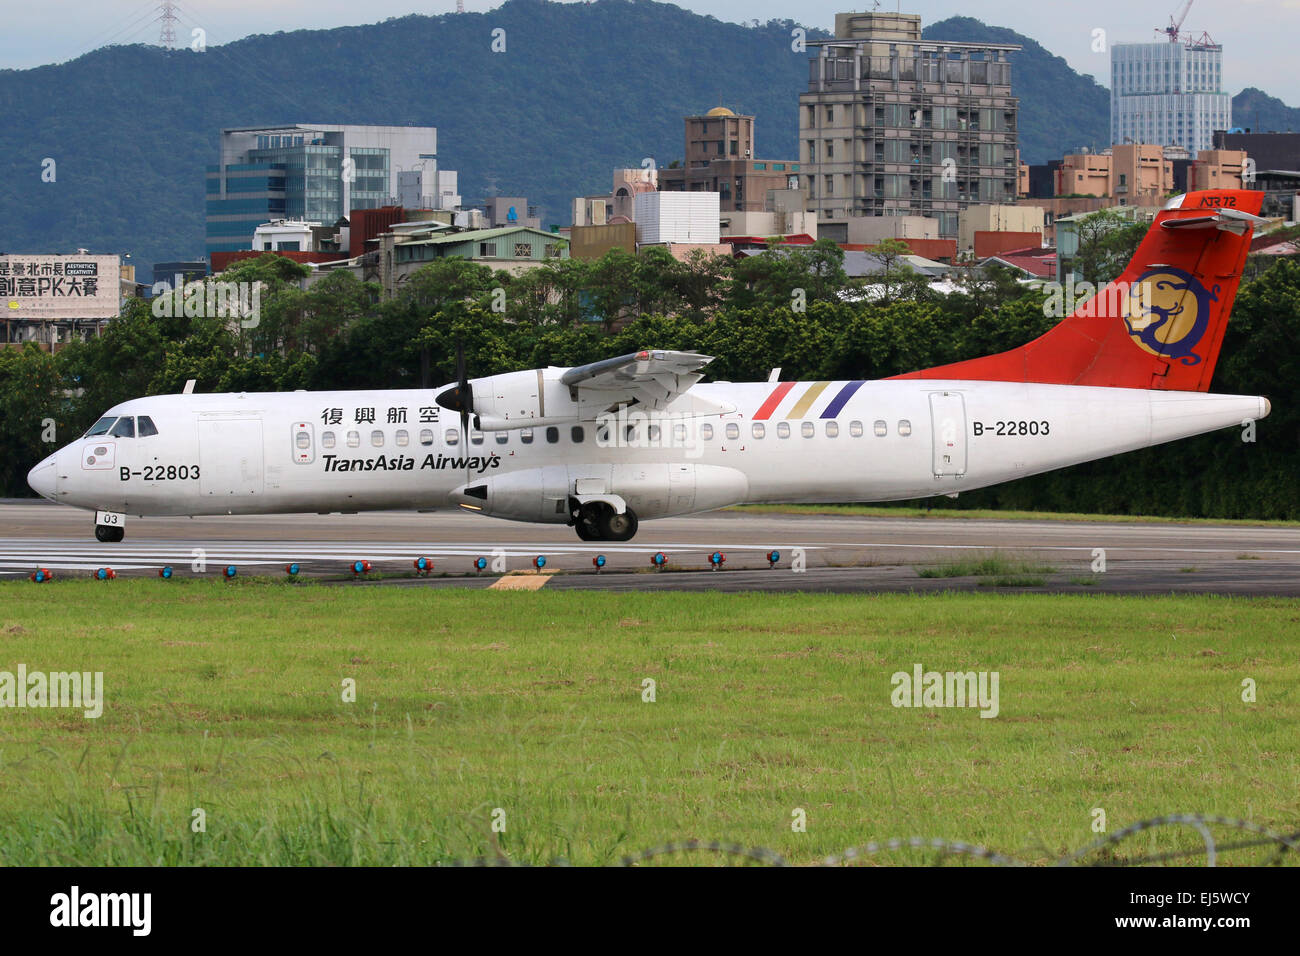 Taipei, Taiwan - May 18, 2014: A TransAsia Airways ATR 72-500 with the registration B-22803 taxis at Taipei Songshan Airport (TS Stock Photo